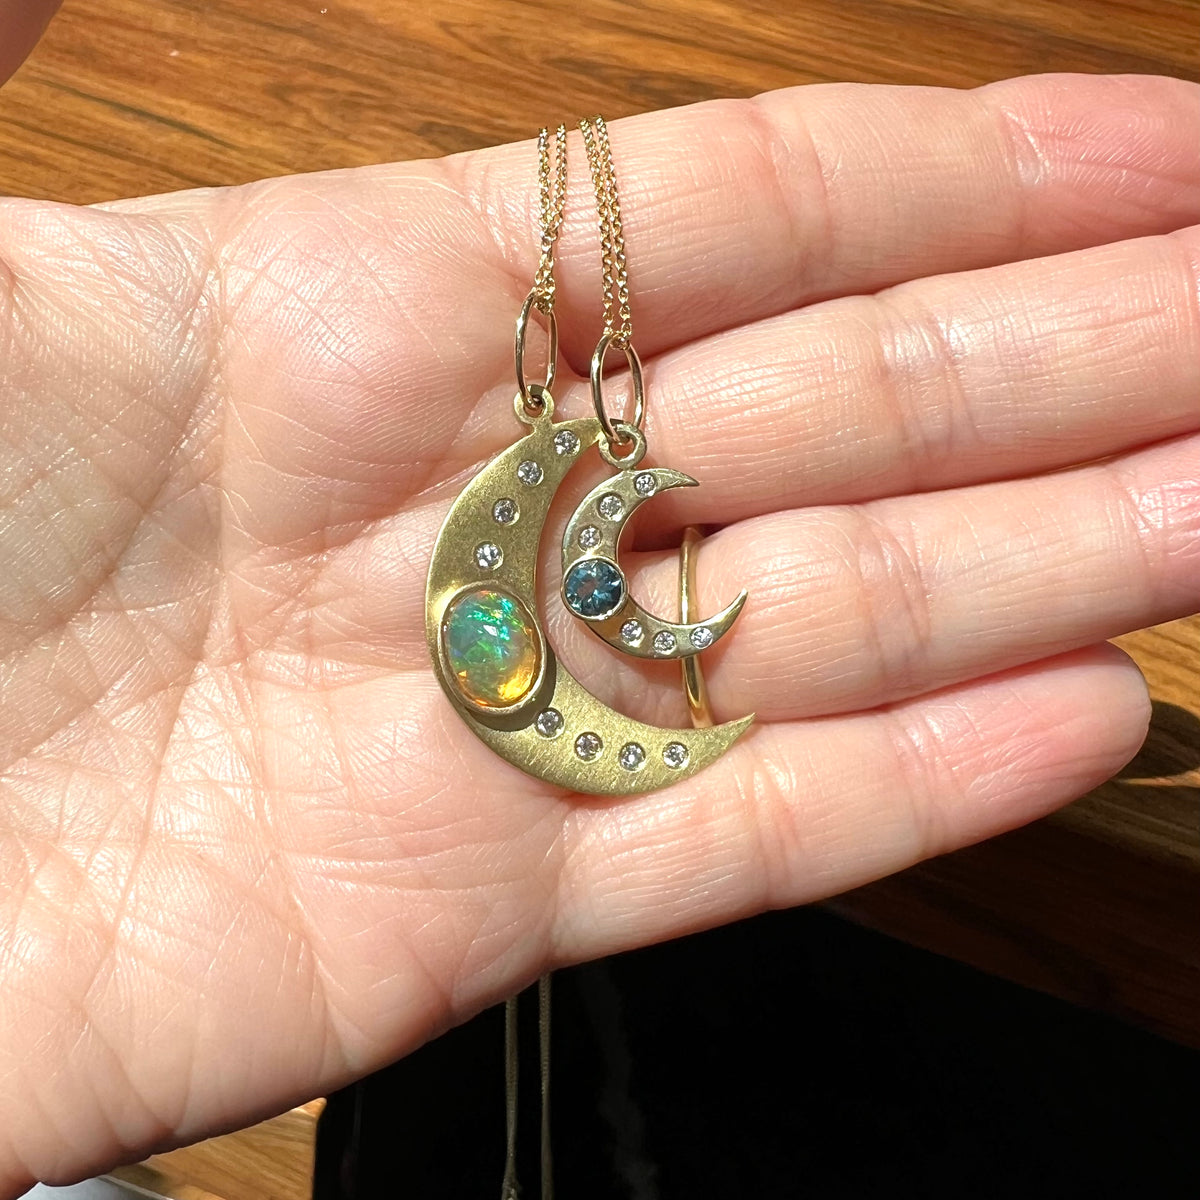 18K CRESCENT MOON CHARMS